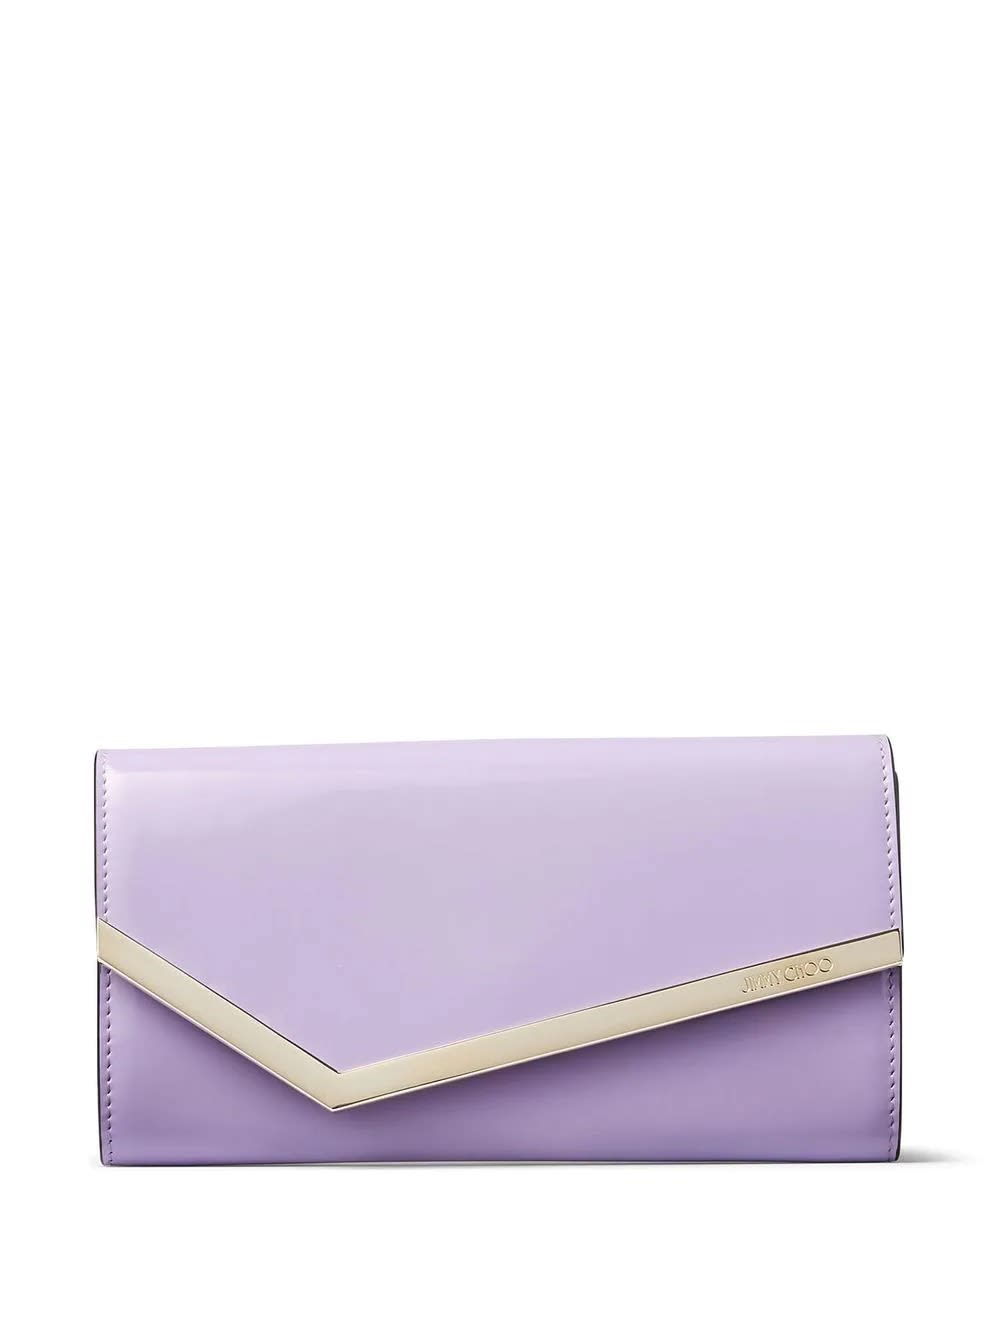 JIMMY CHOO EMMIE CLUTCH BAG IN WISTERIA PATENT LEATHER